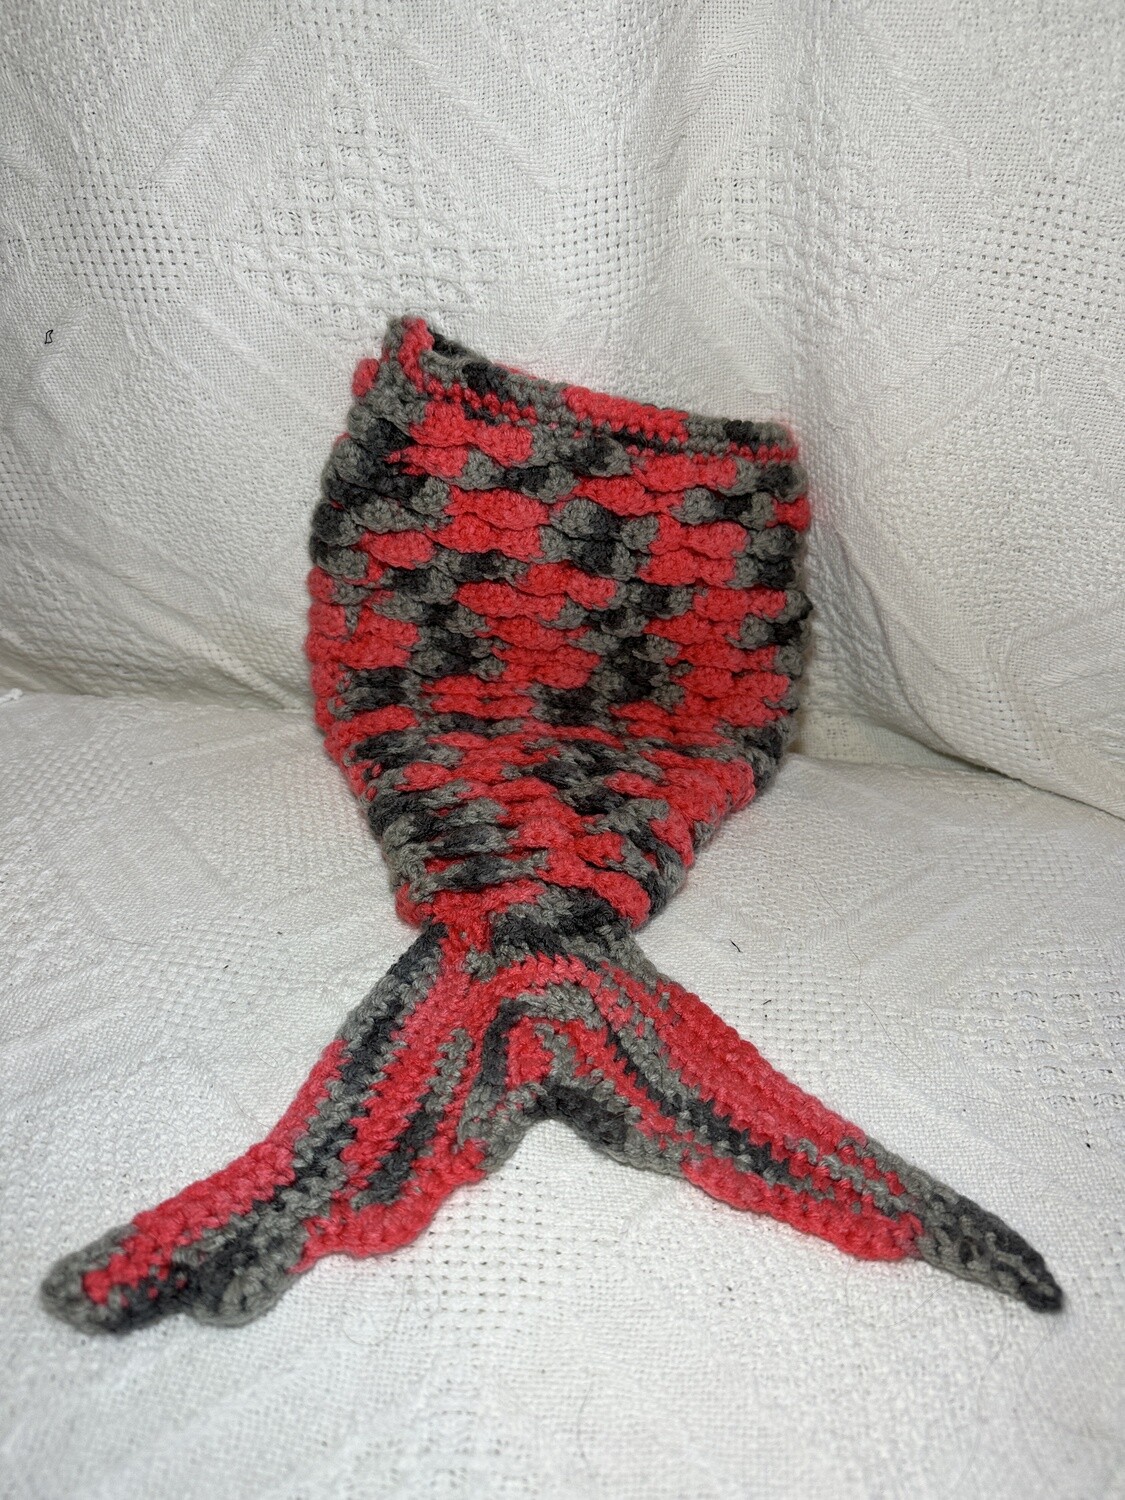 Handmade, Crochet Mermaid Tail Photo Prop for 3-6mth old